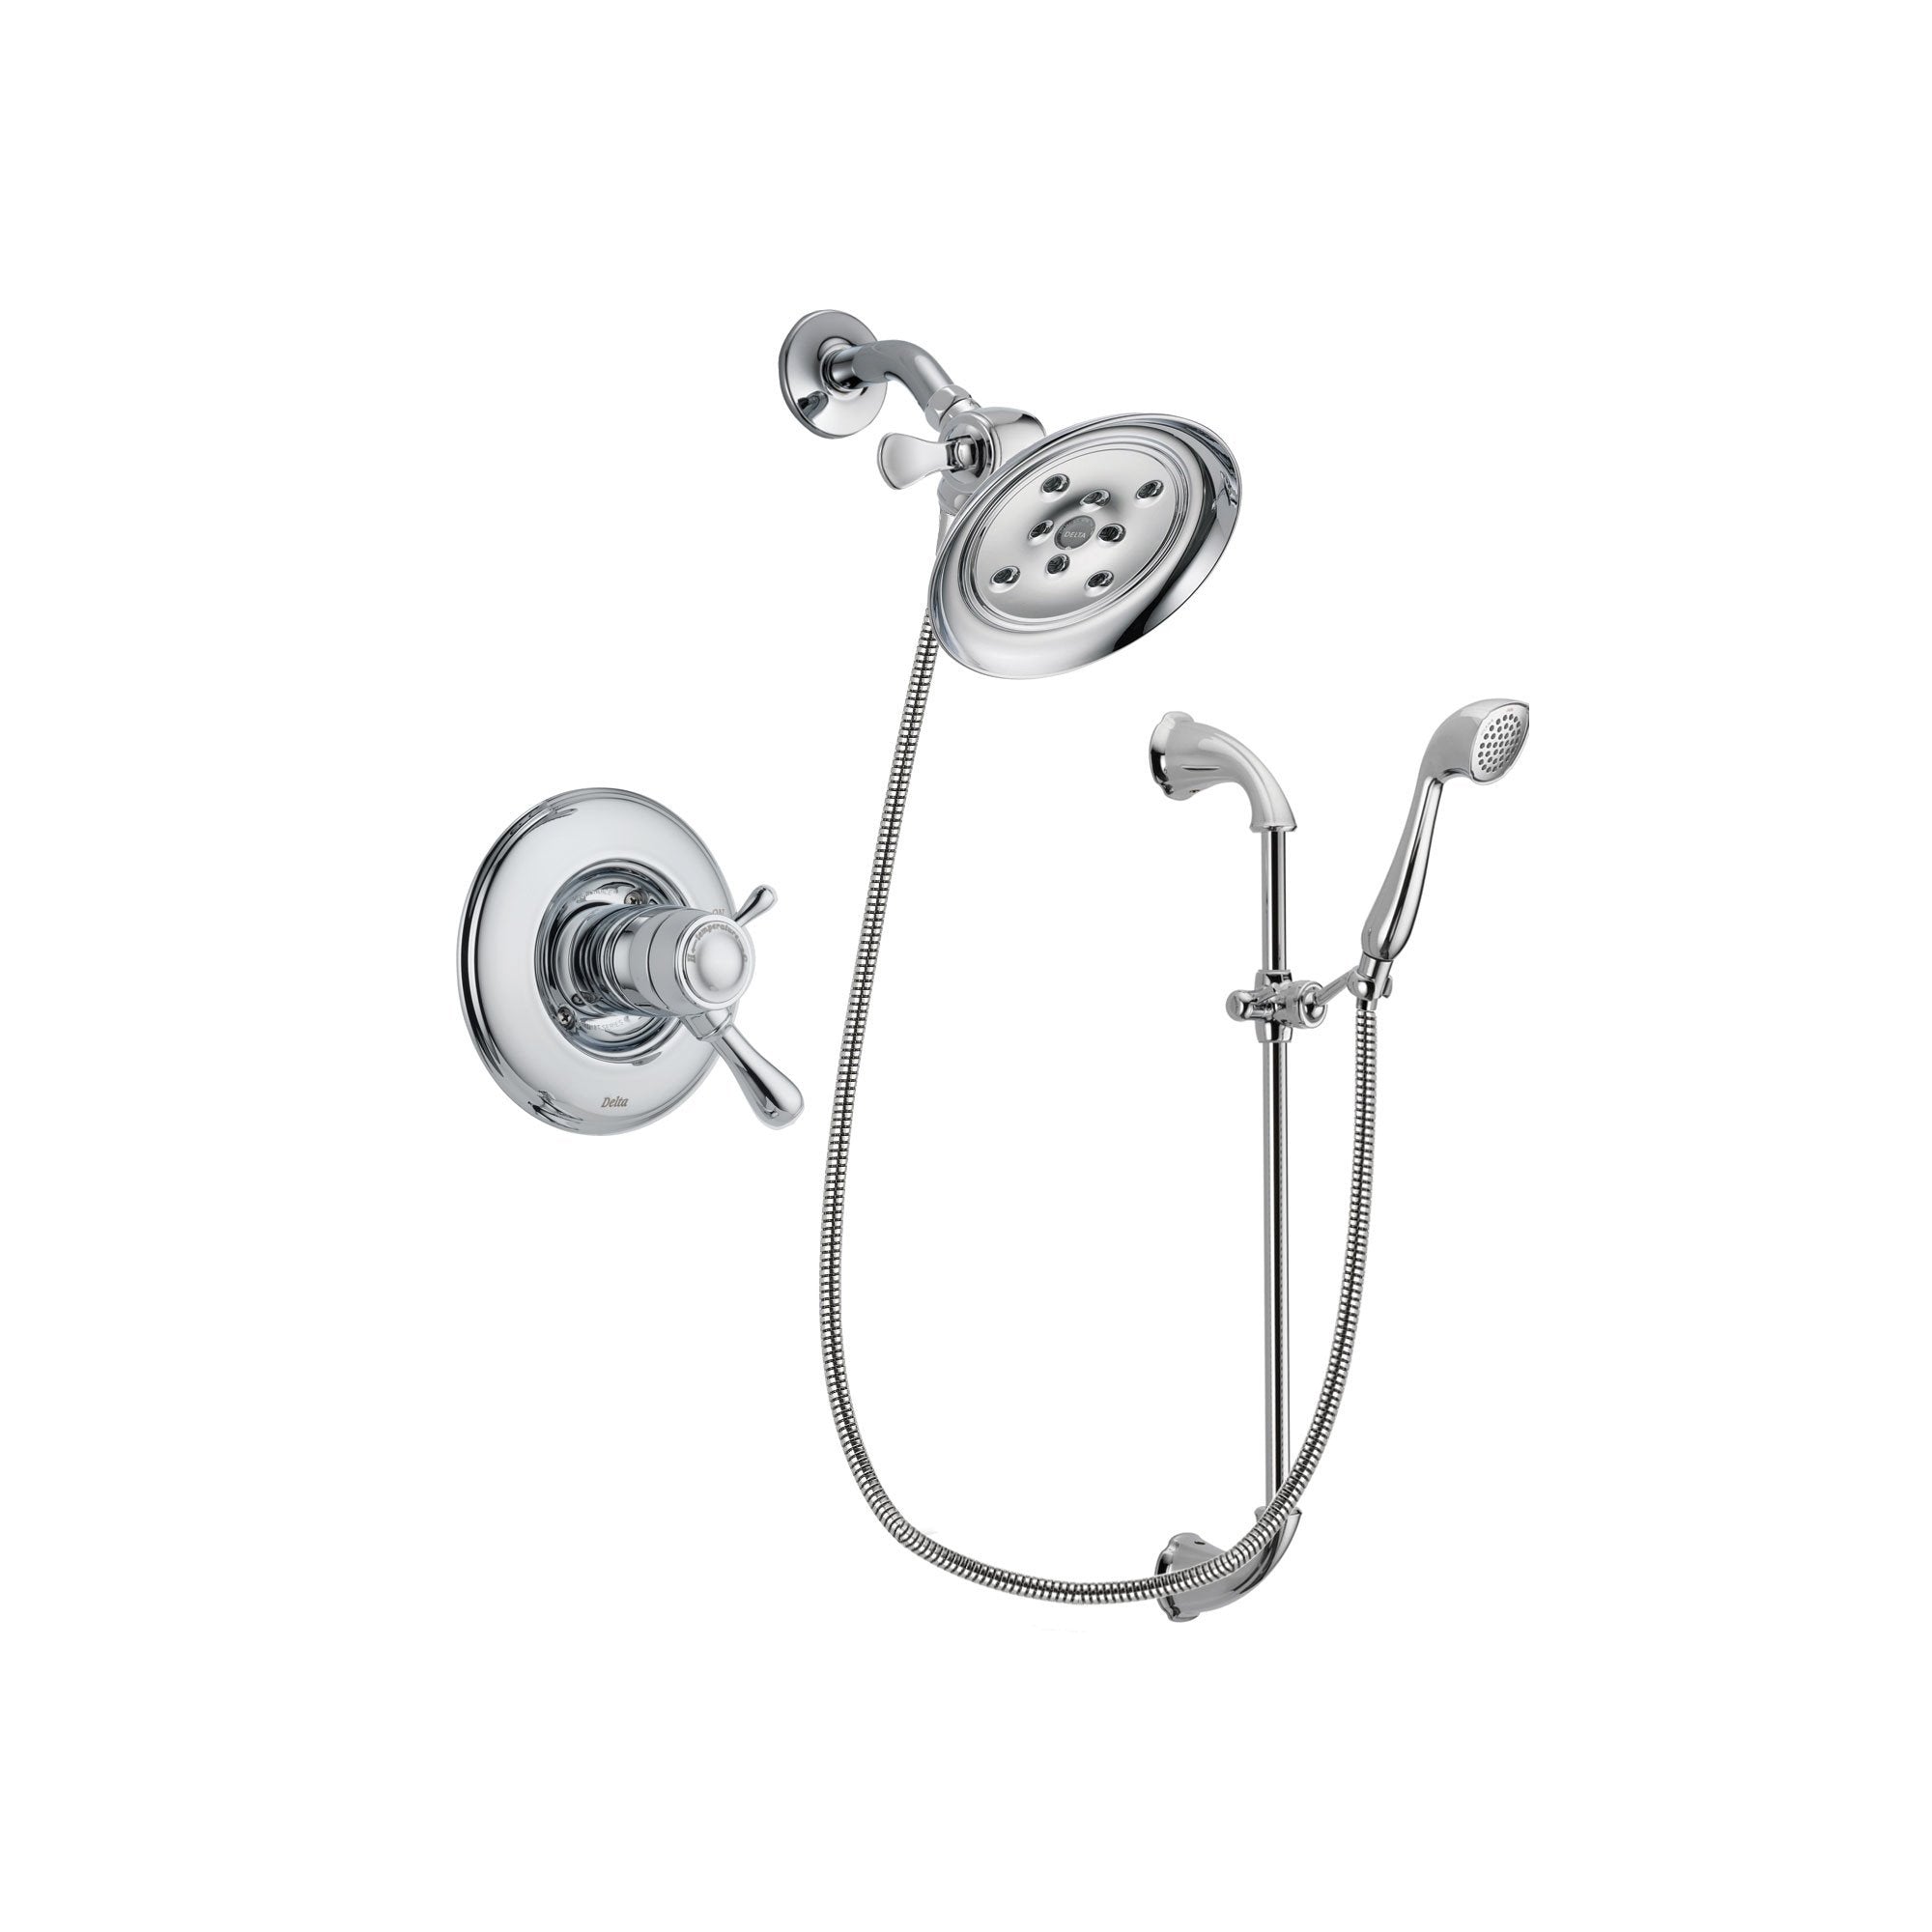 Delta Leland Chrome Finish Thermostatic Shower Faucet System Package with Large Rain Showerhead and Handheld Shower with Slide Bar Includes Rough-in Valve DSP0906V